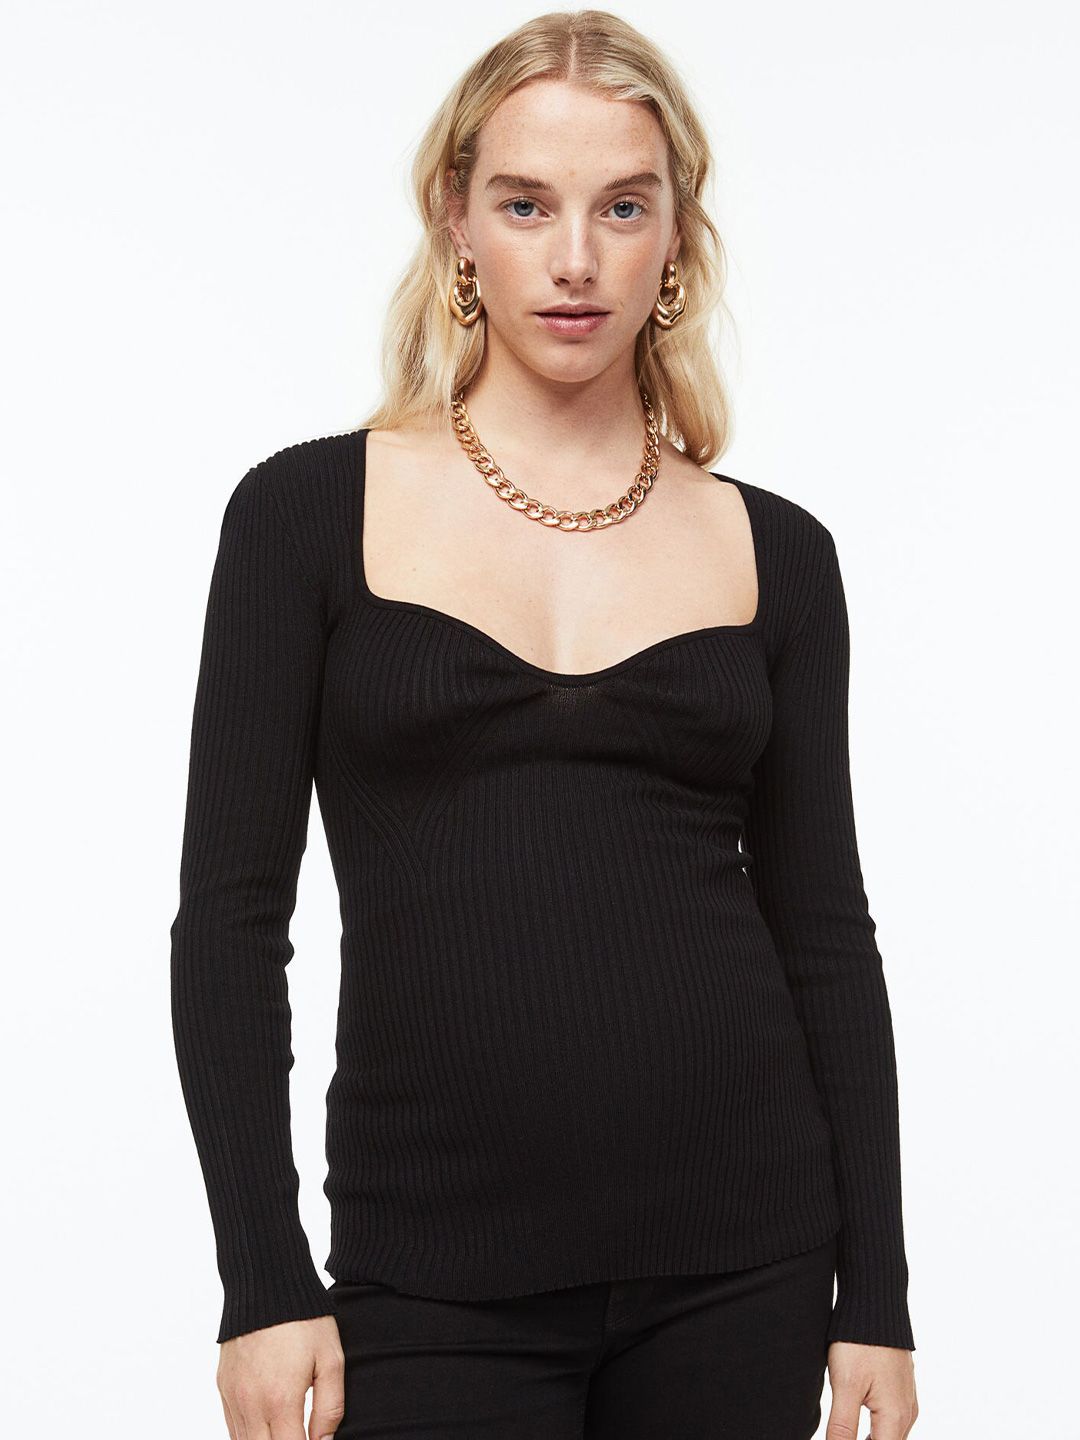 H&M Black Sweetheart Neck Top Price in India